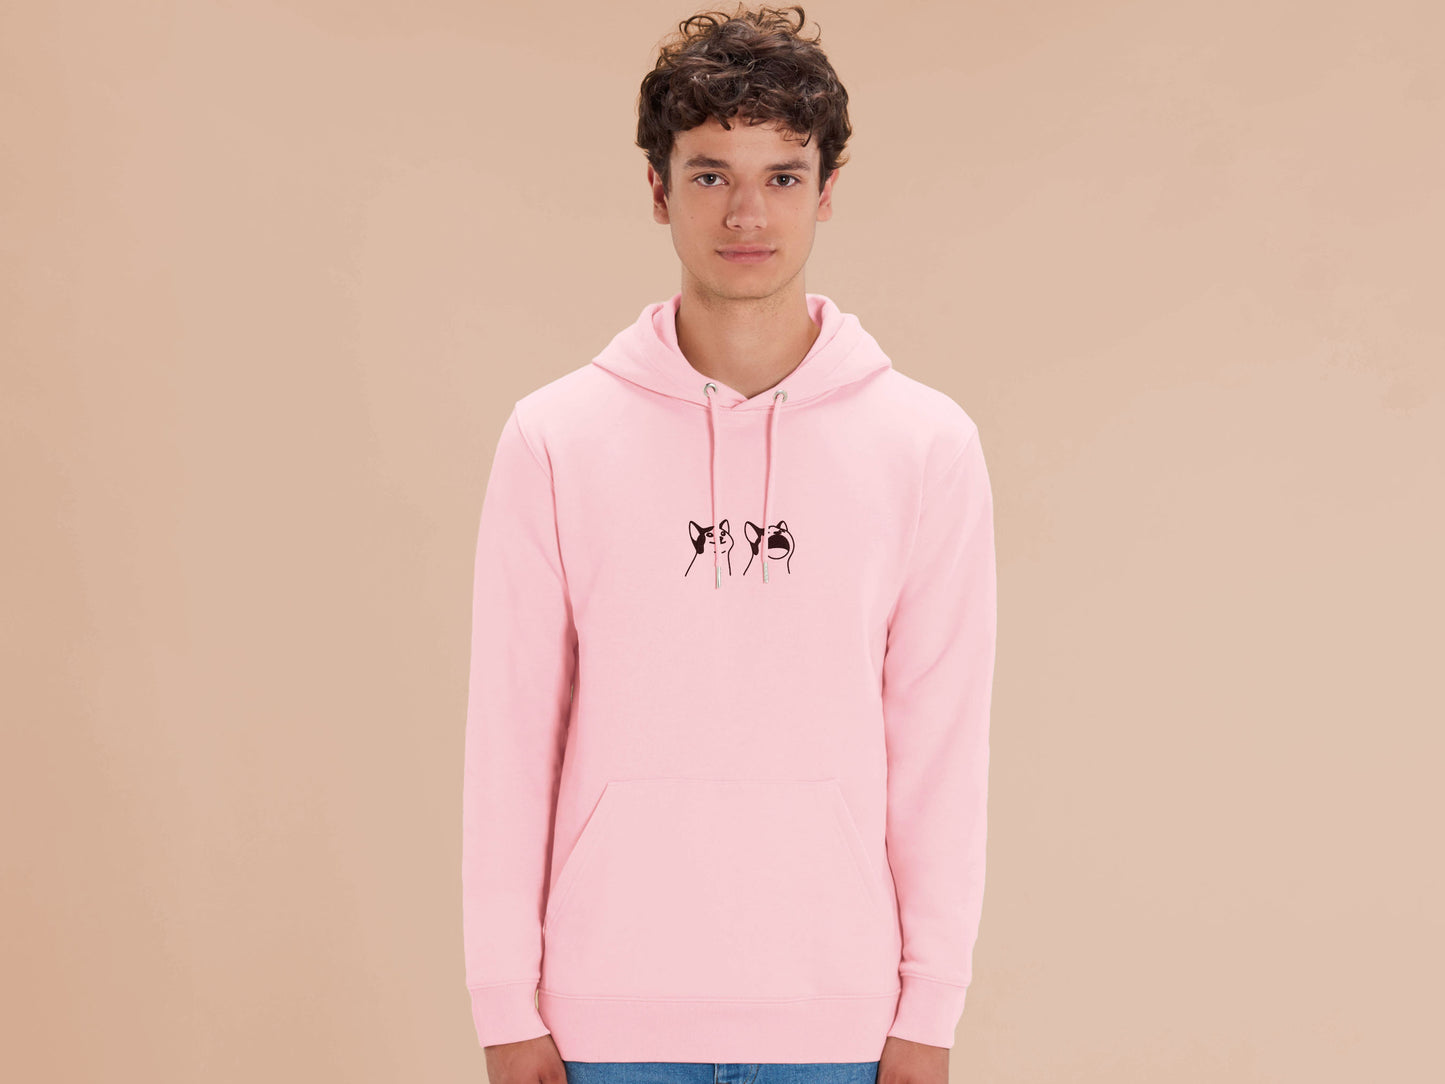 A man wearing a pink long sleeved fleece hoodie, with an embroidered brown thread design of a cute popcat the cat meme reaction twitch emote